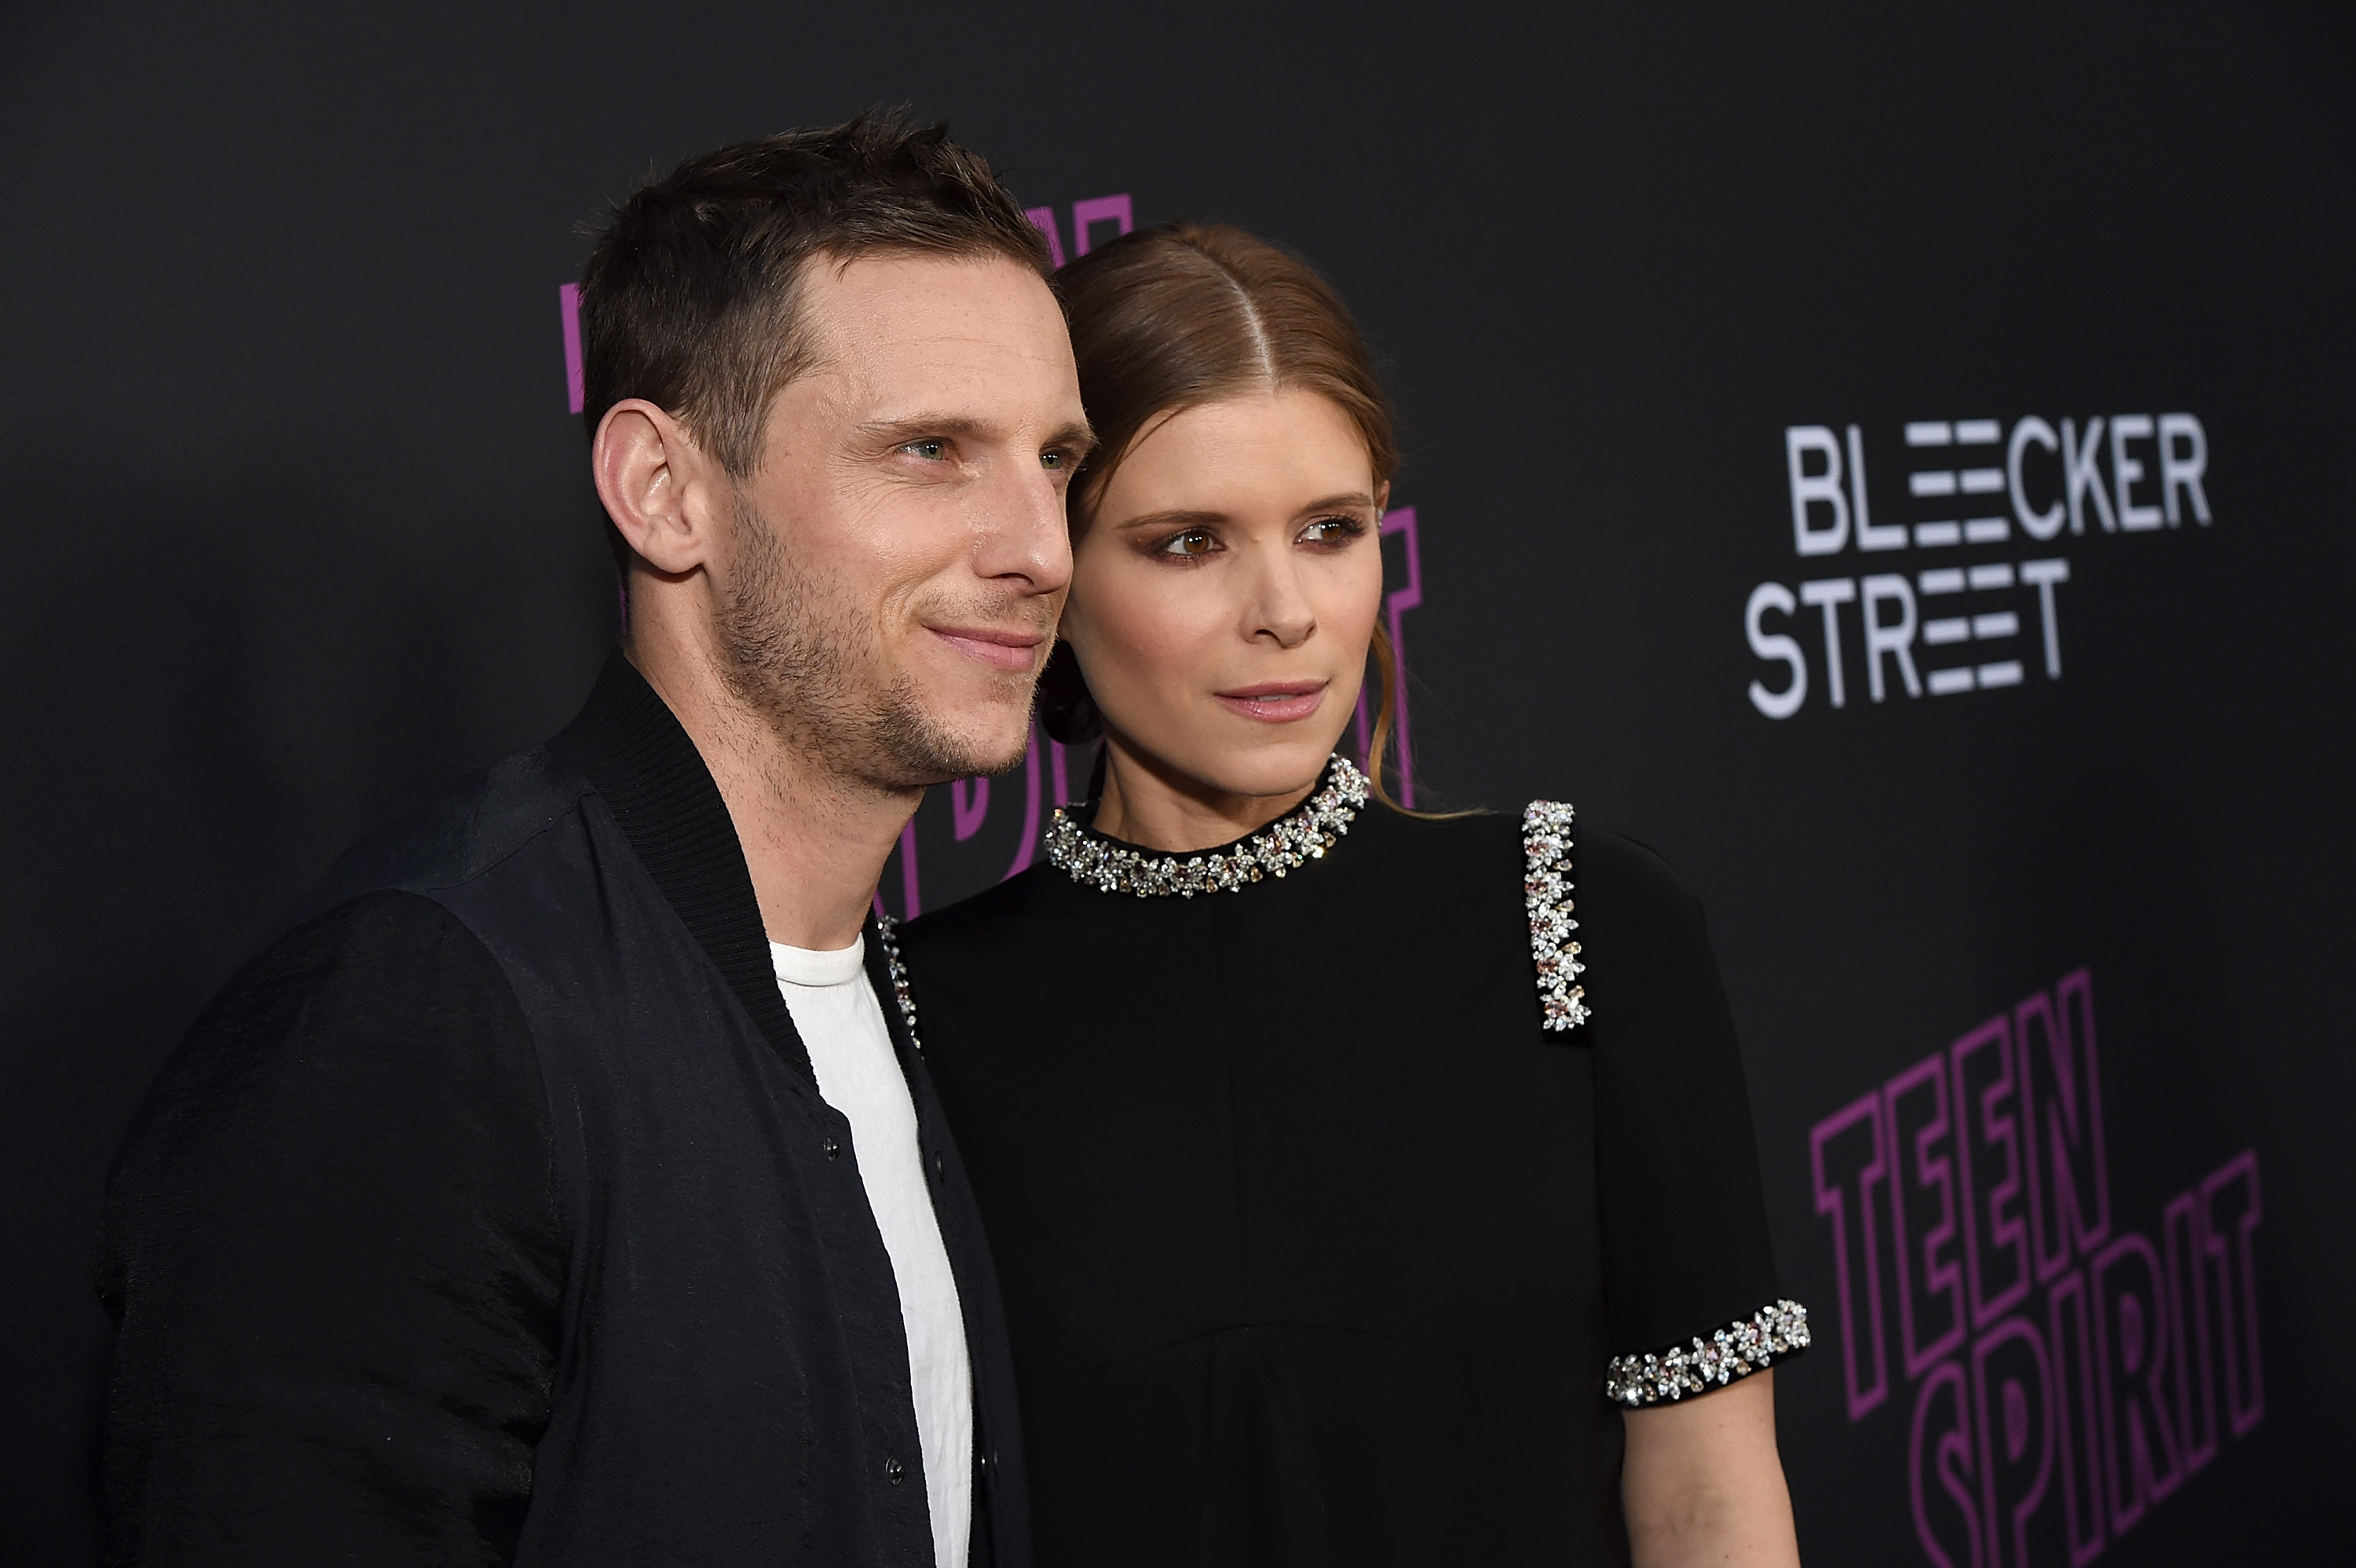 Dating kate mara Who is